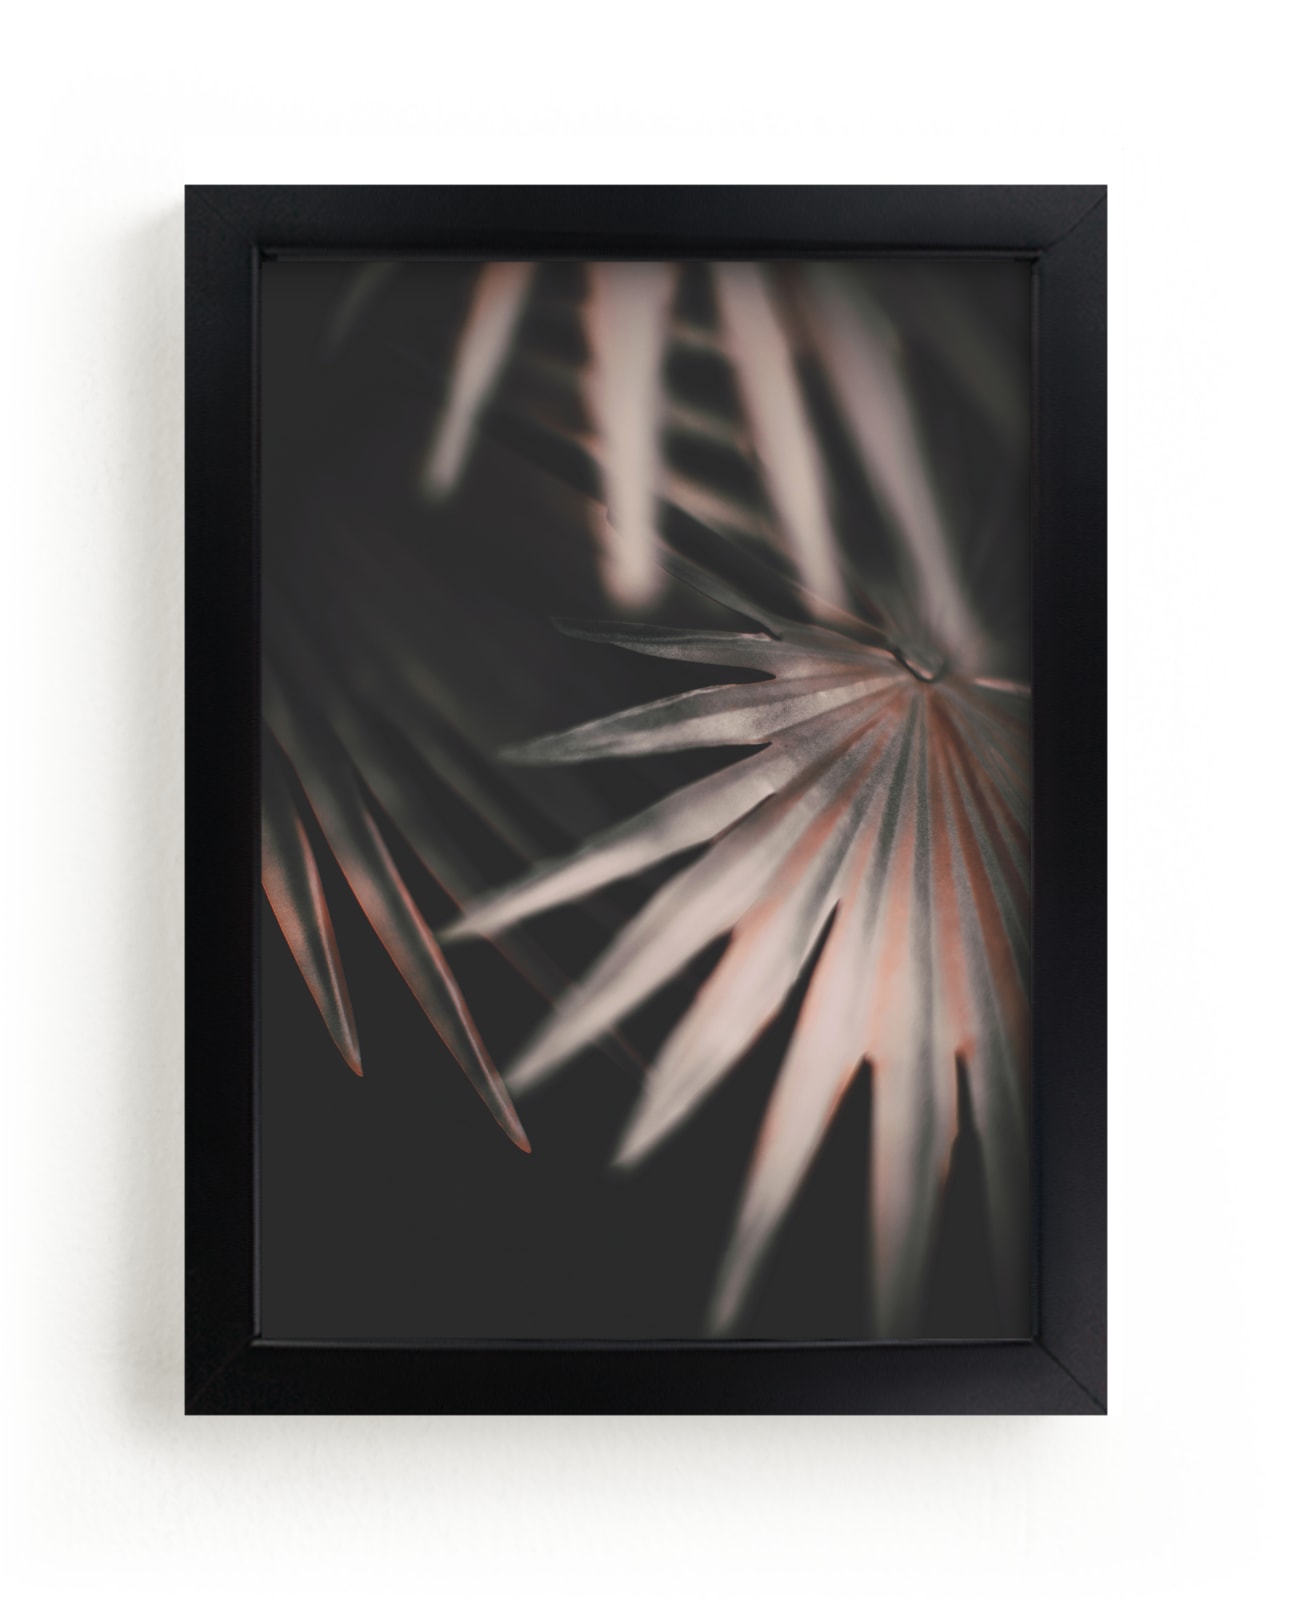 "Copper Ferns 2" - Limited Edition Art Print by Alicia Abla in beautiful frame options and a variety of sizes.